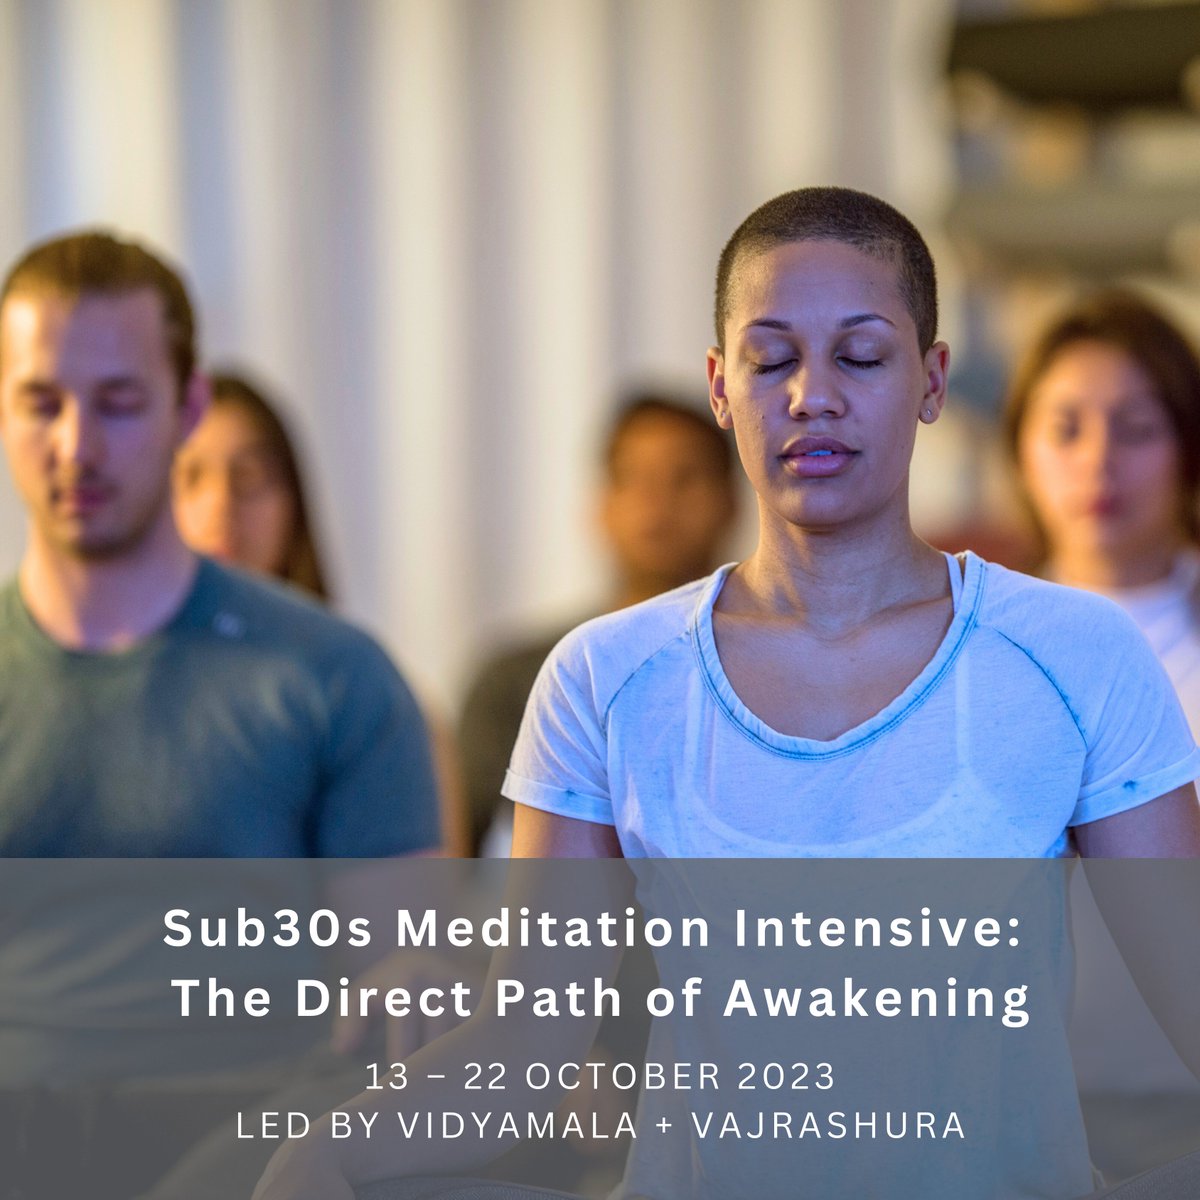 On Oct 13 at Adhisthana, I’ll be co-leading the Sub30s Intensive meditation retreat with @vajrashura It's a chance to get away from the noise and complexity of modern life and deepen your experience of yourself and of the world around you. To book: adhisthana.org/retreat-calend…